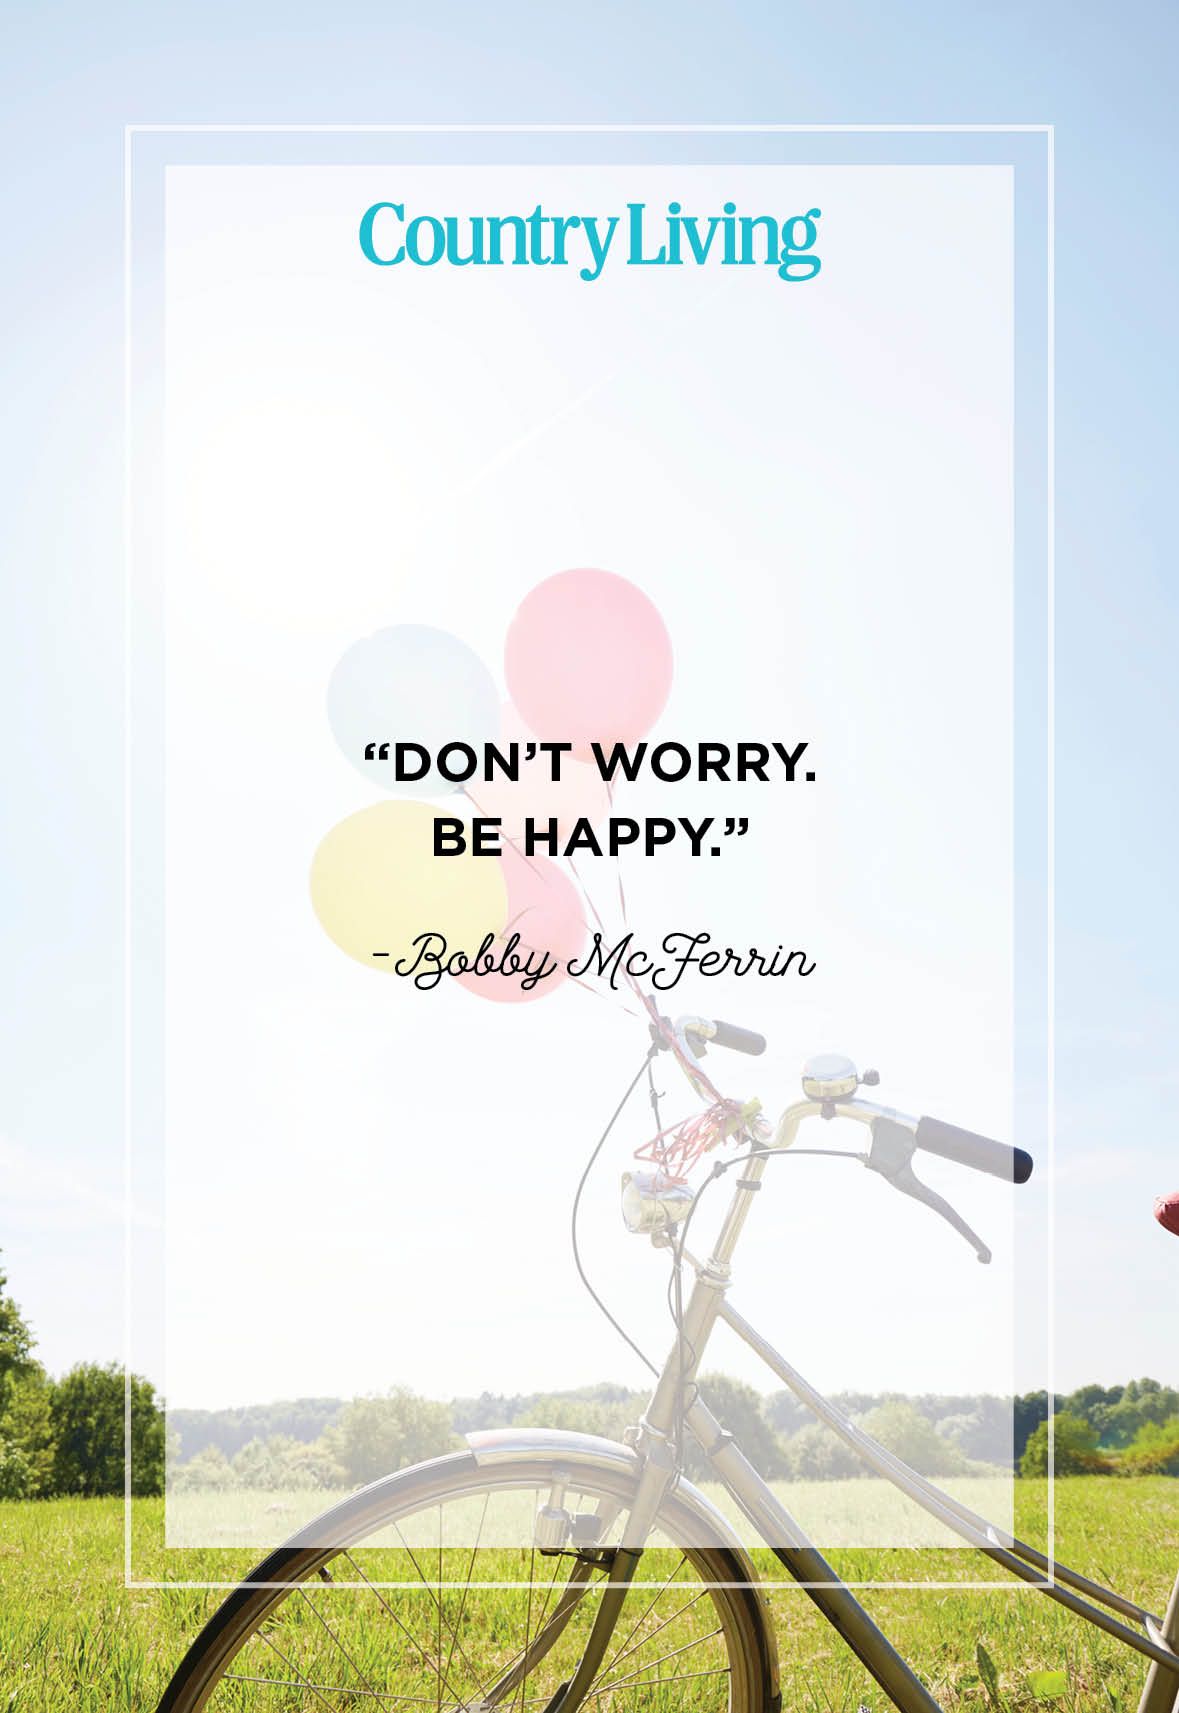 being happy quotes and sayings